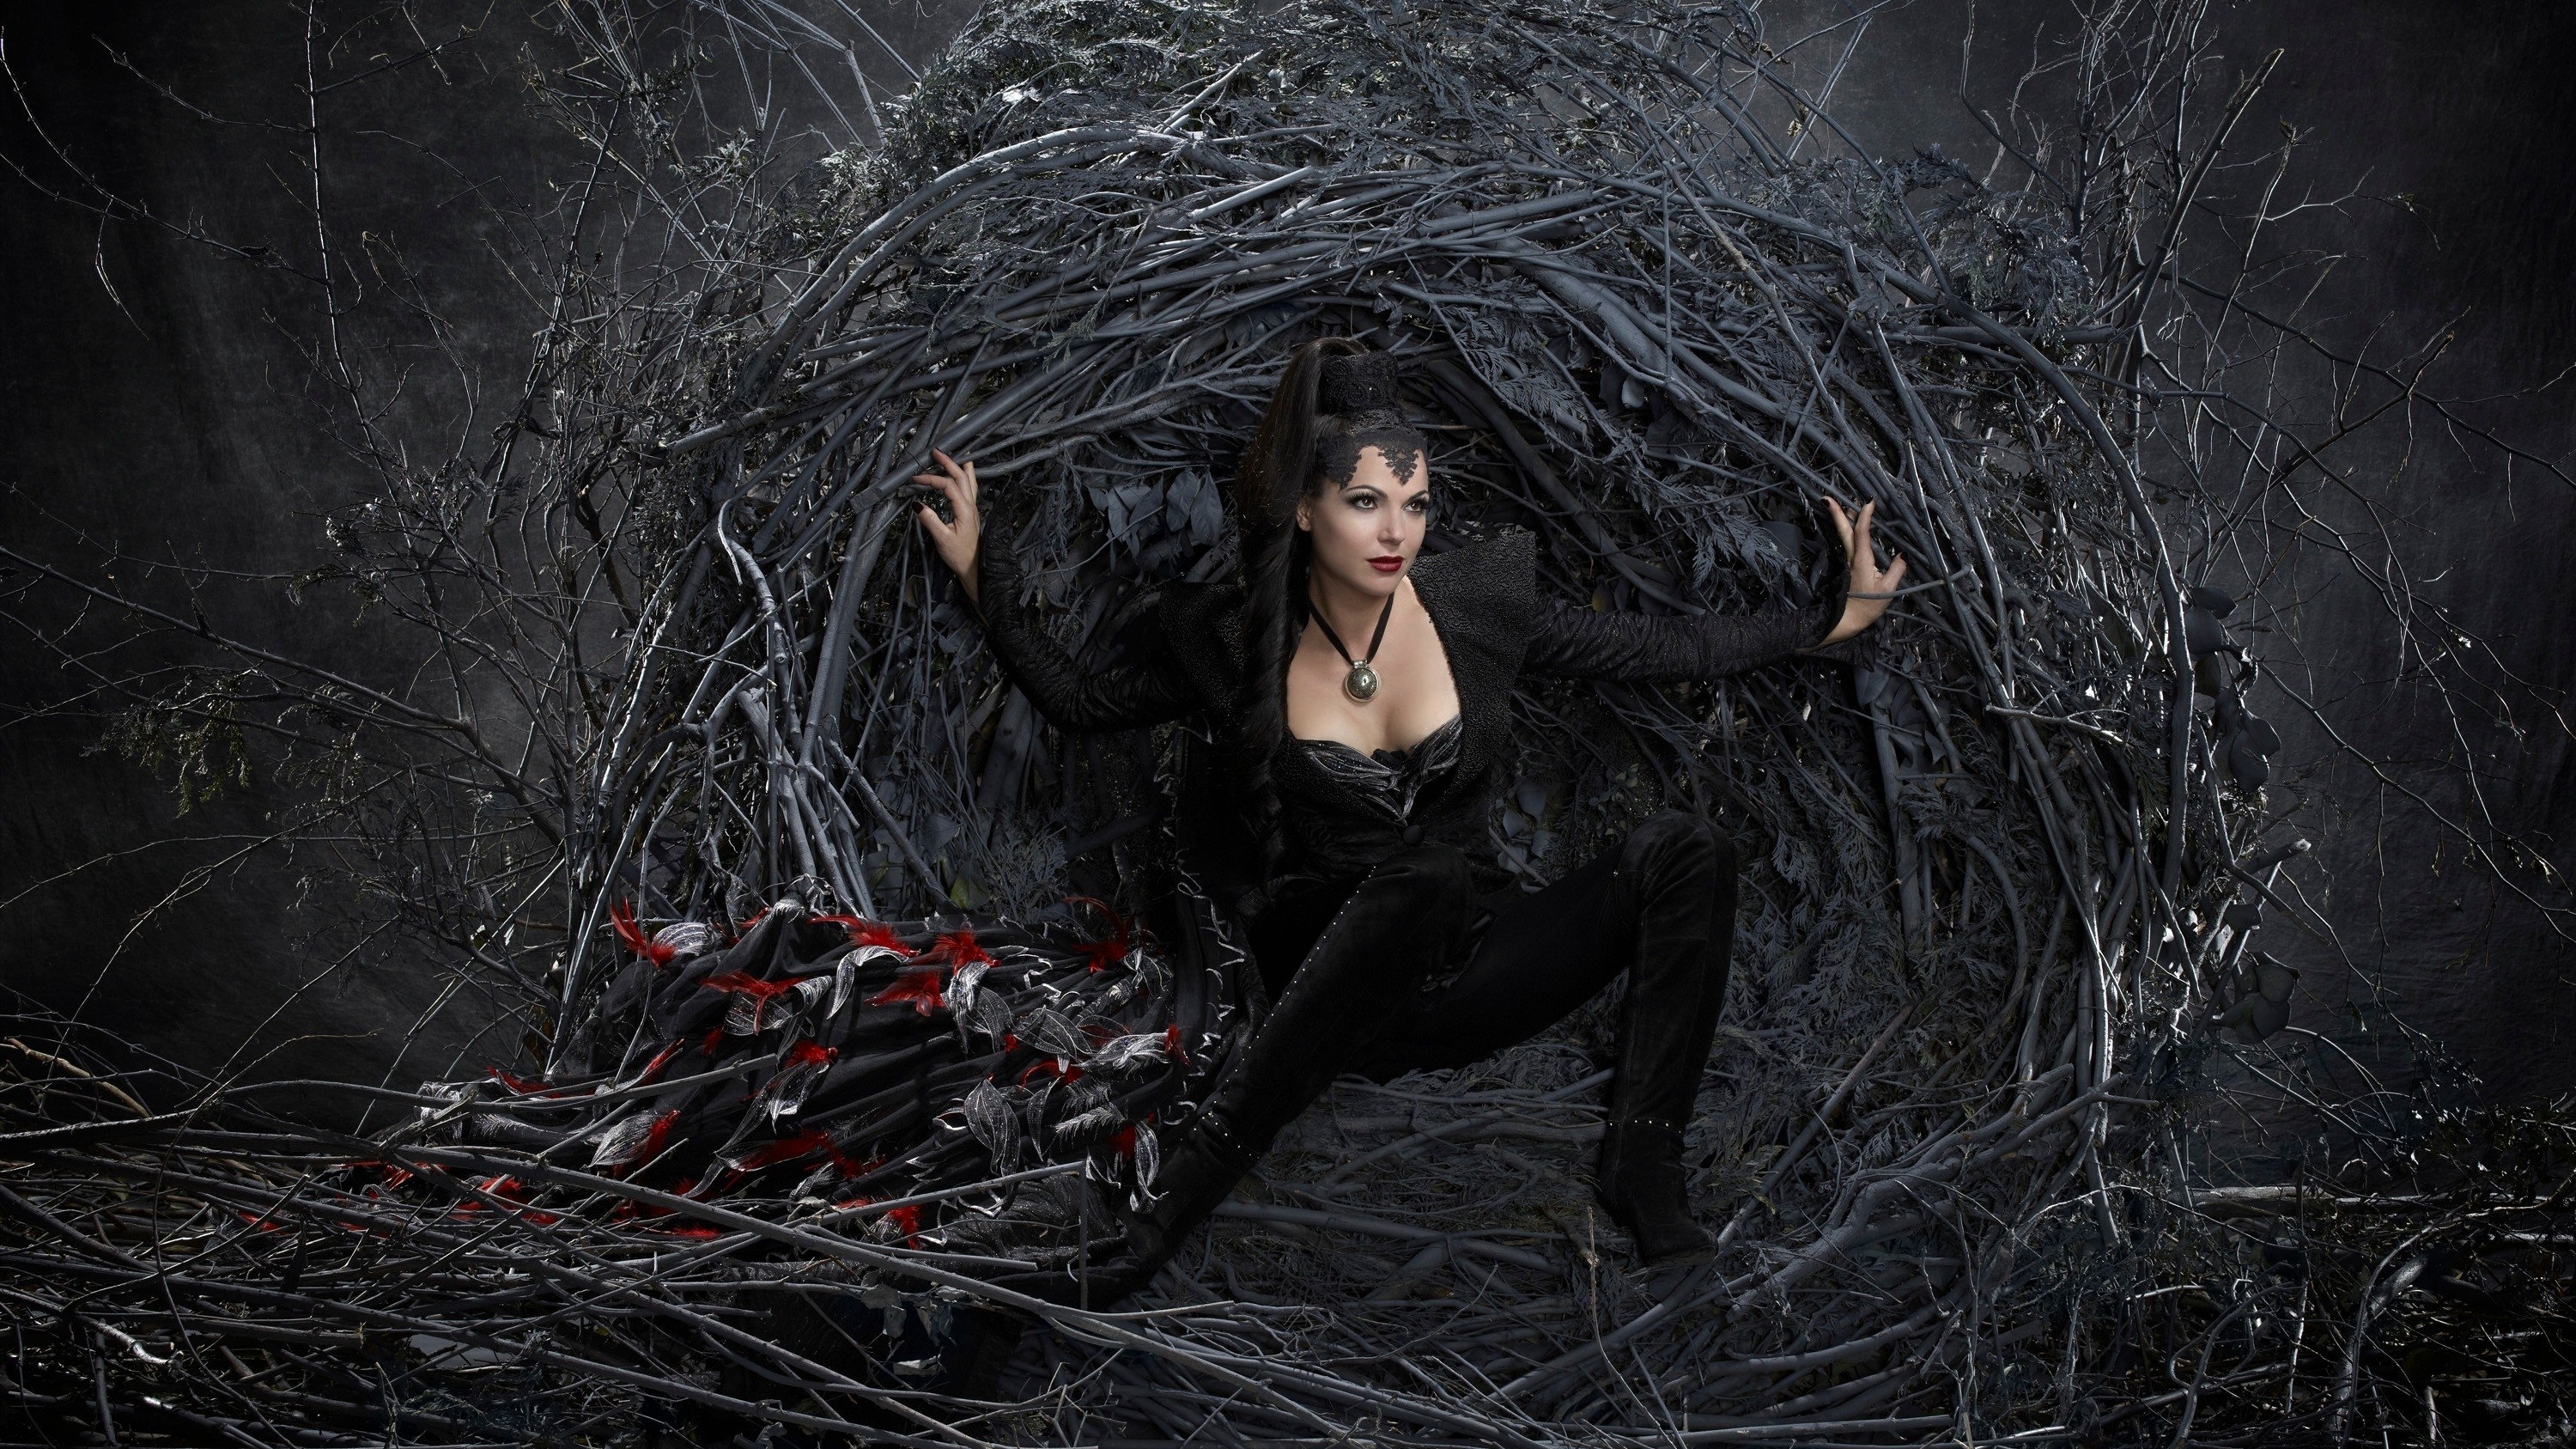 Regina, better known as the Evil Queen